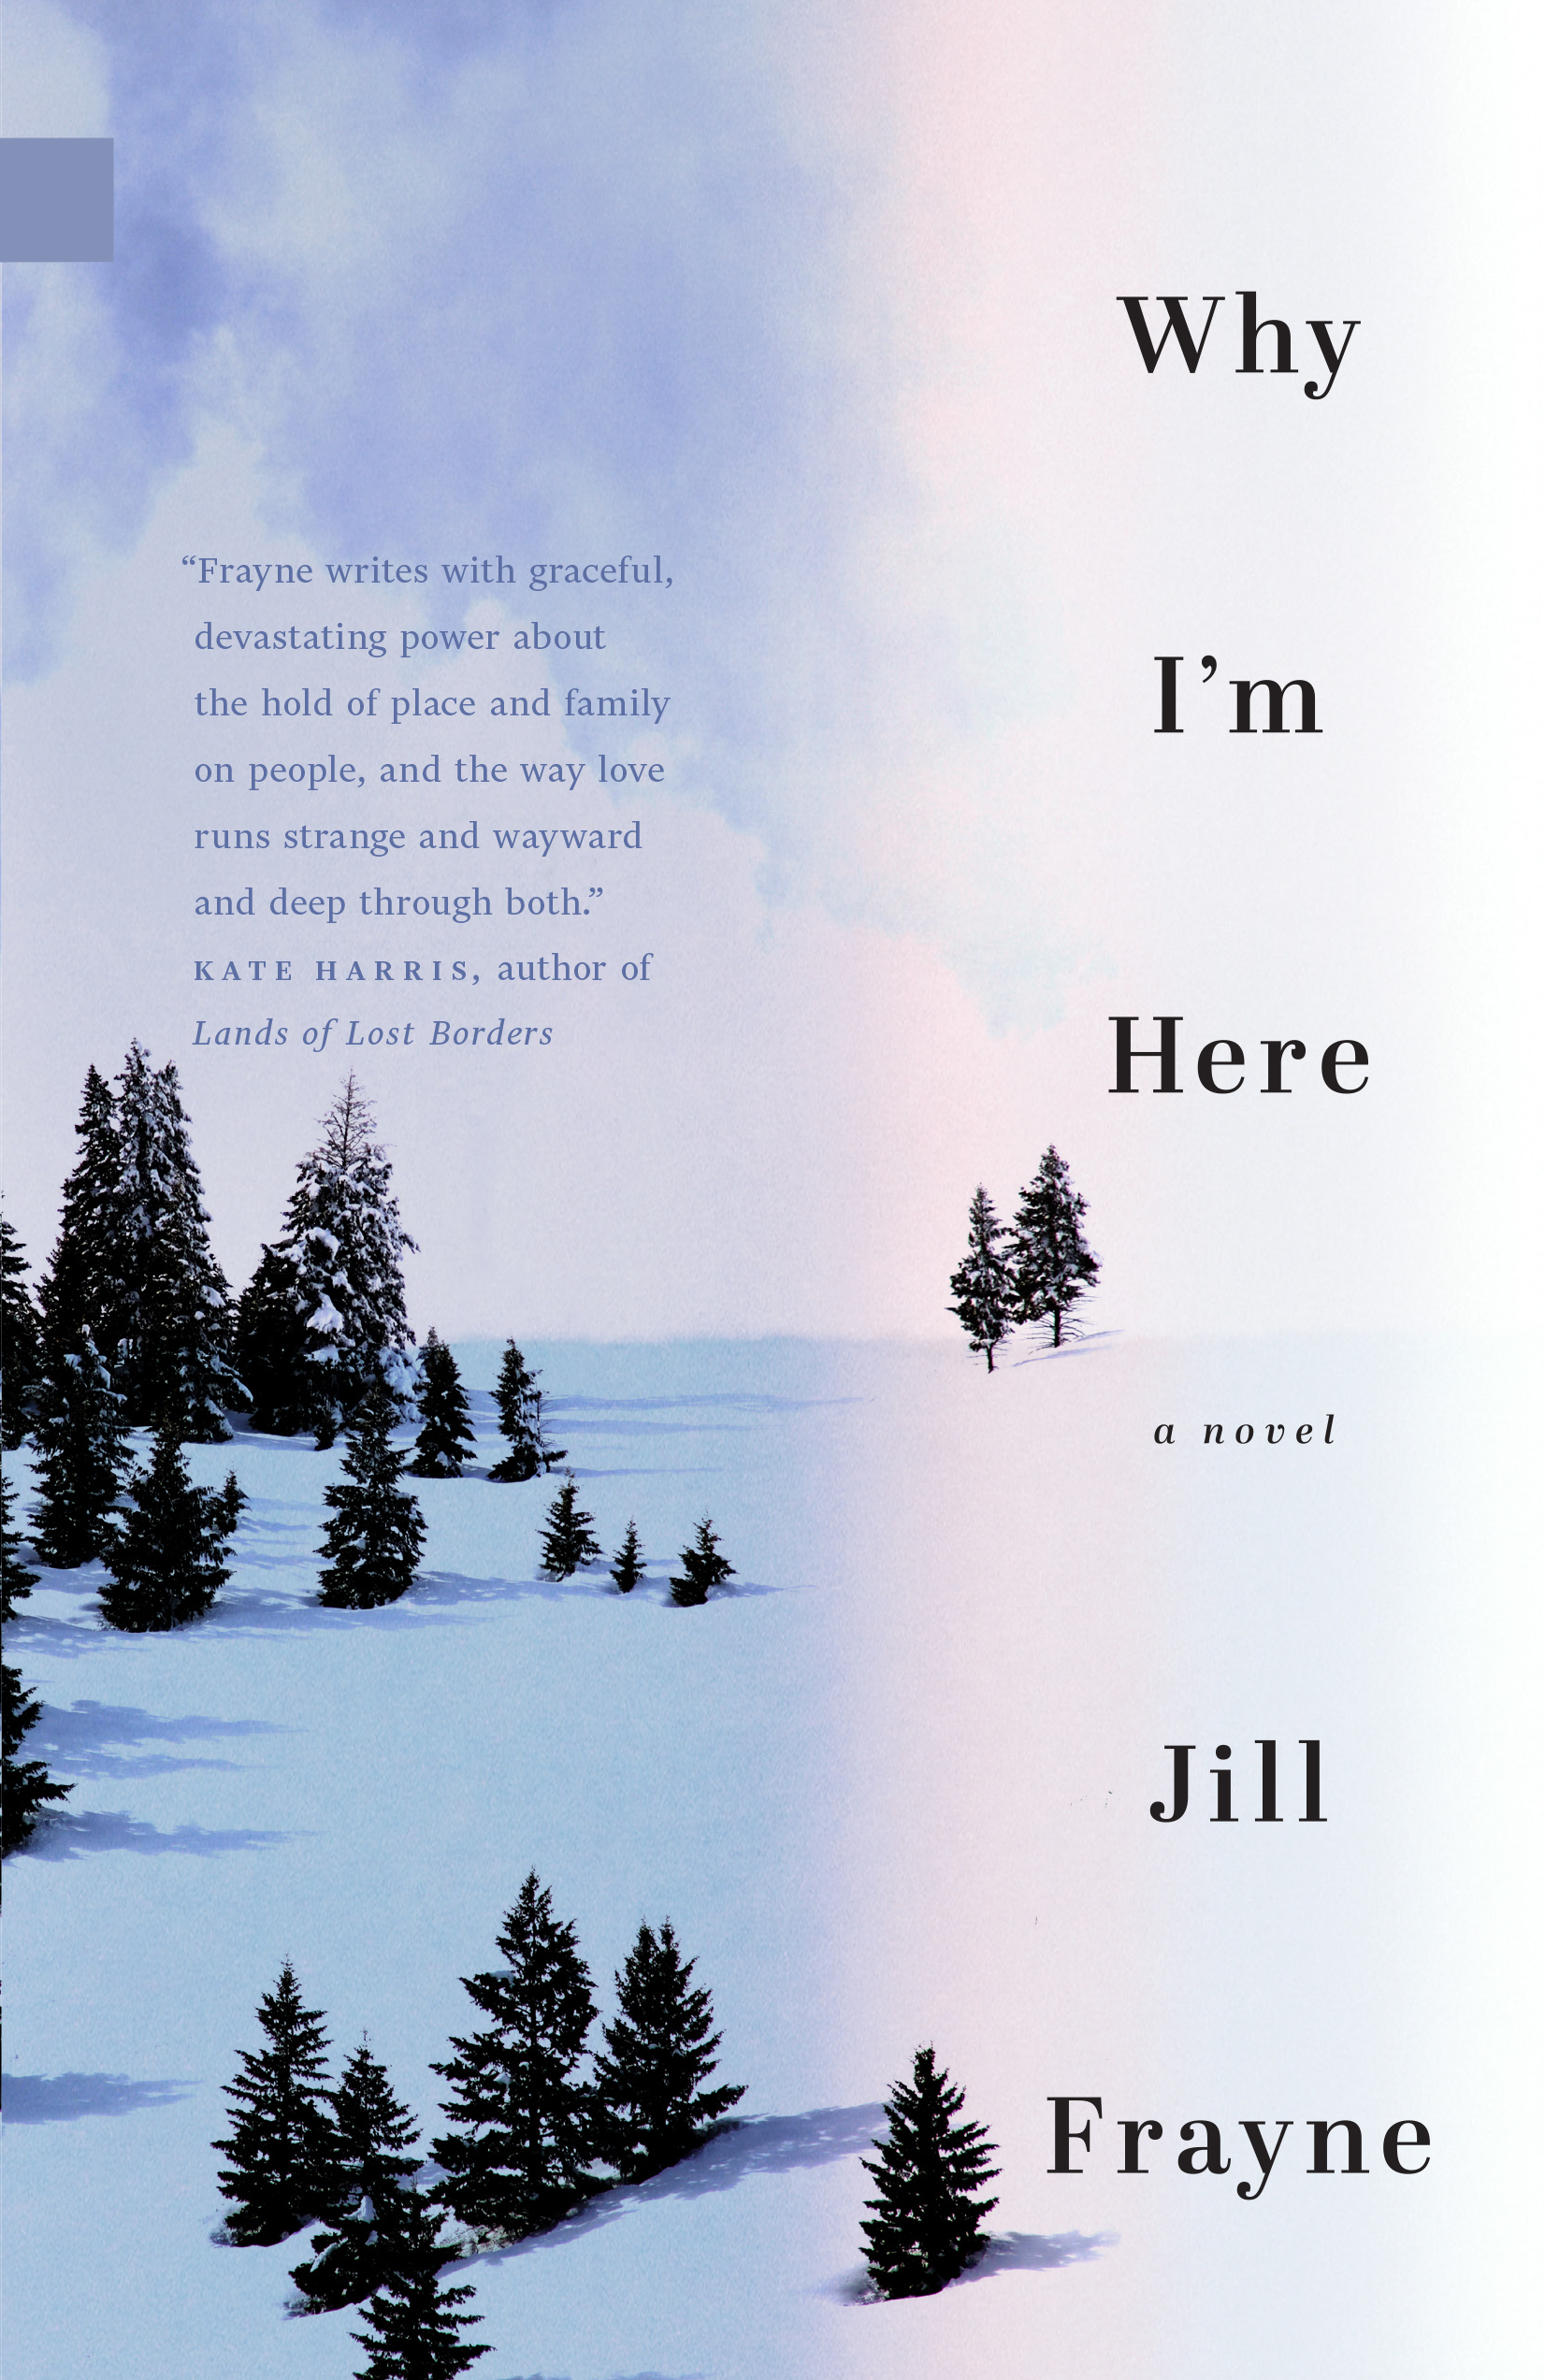 The cover of Why I'm Here by Jill Frayne.